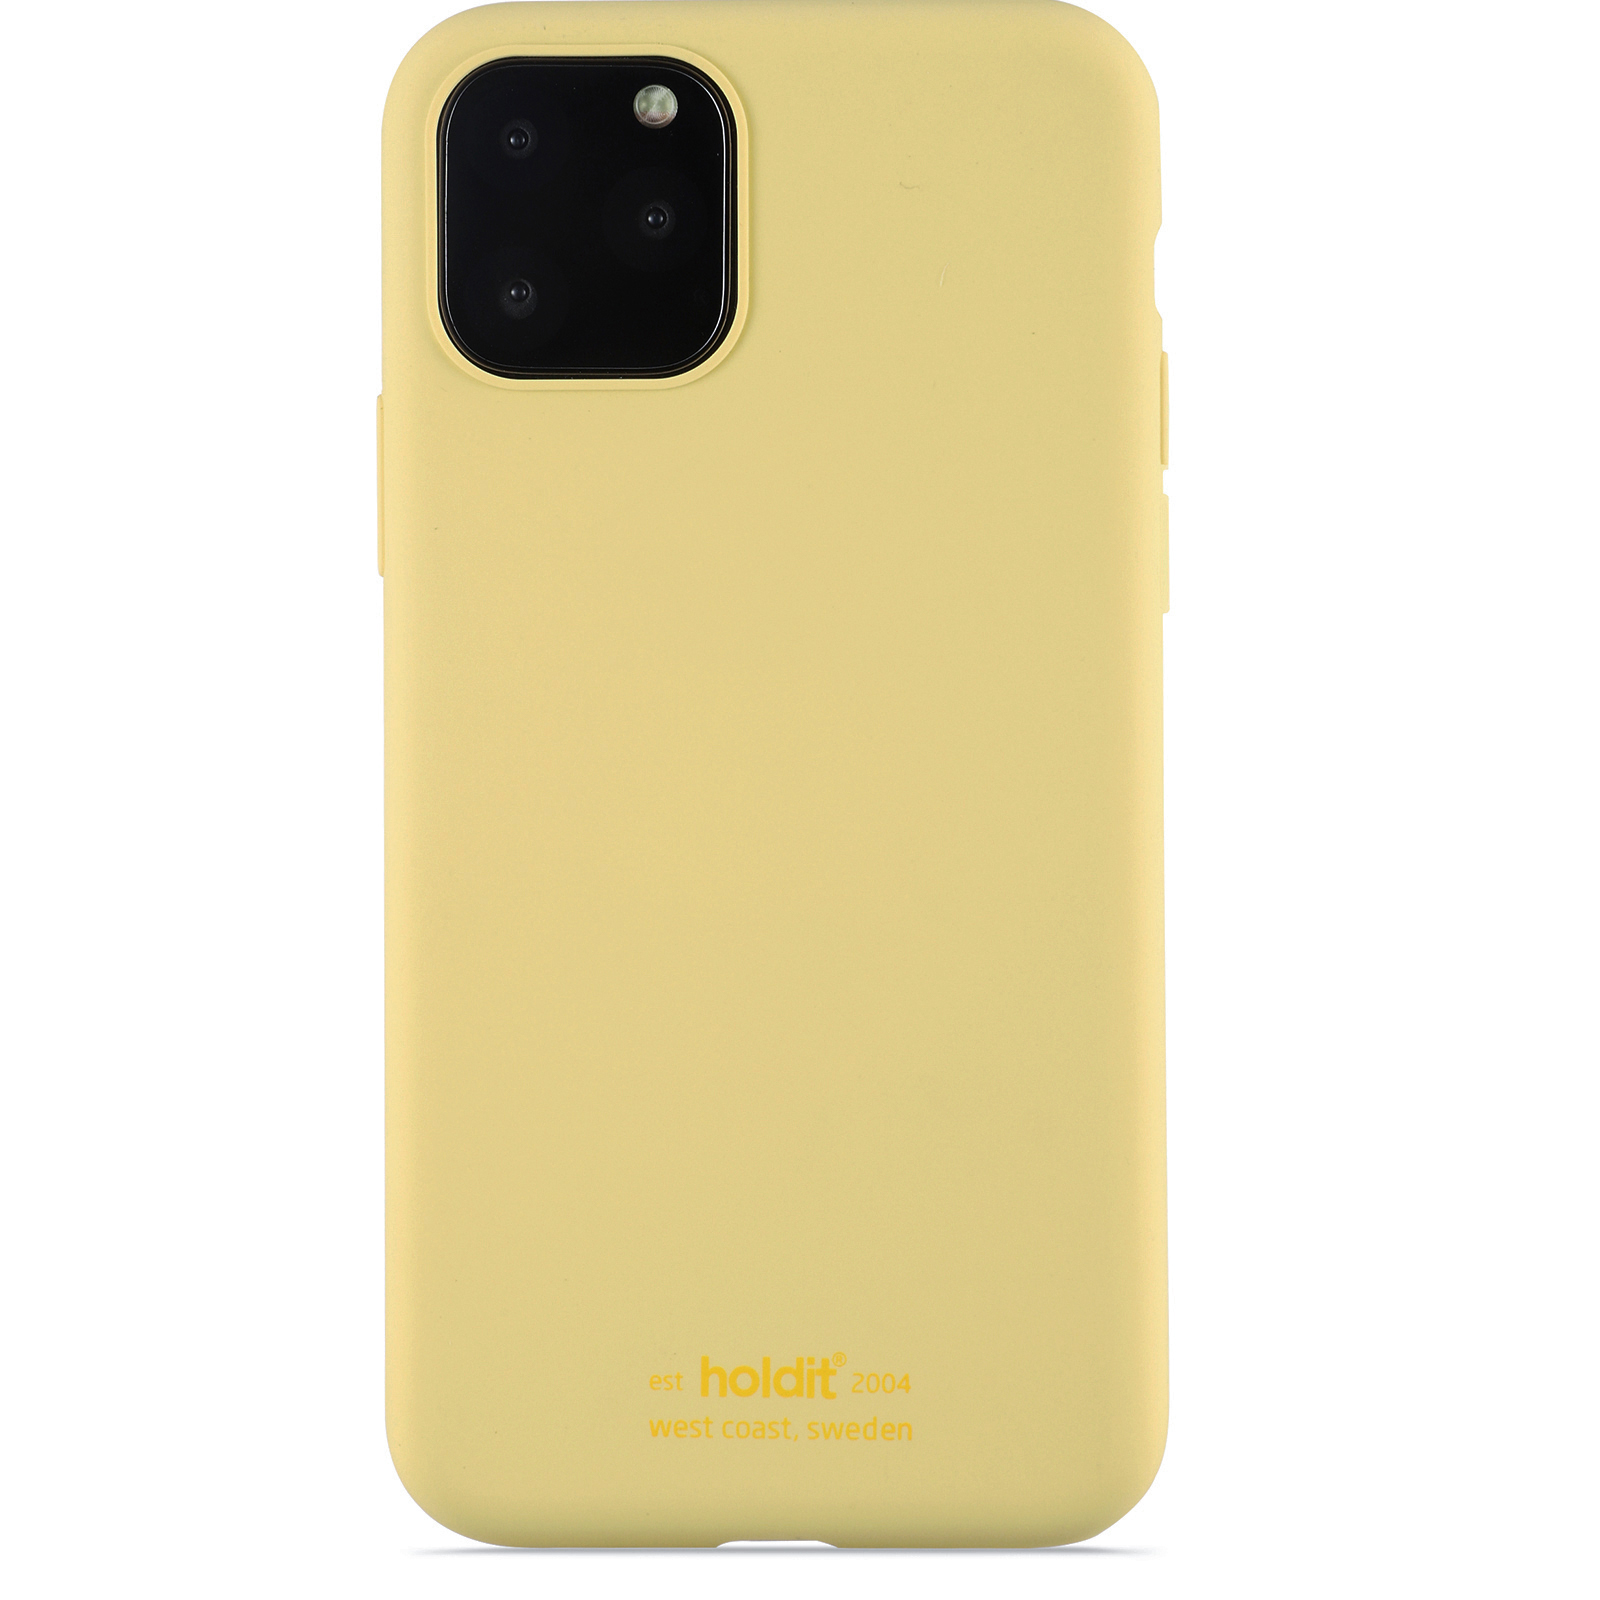 iPhone 11 Pro, case silicone, yellow